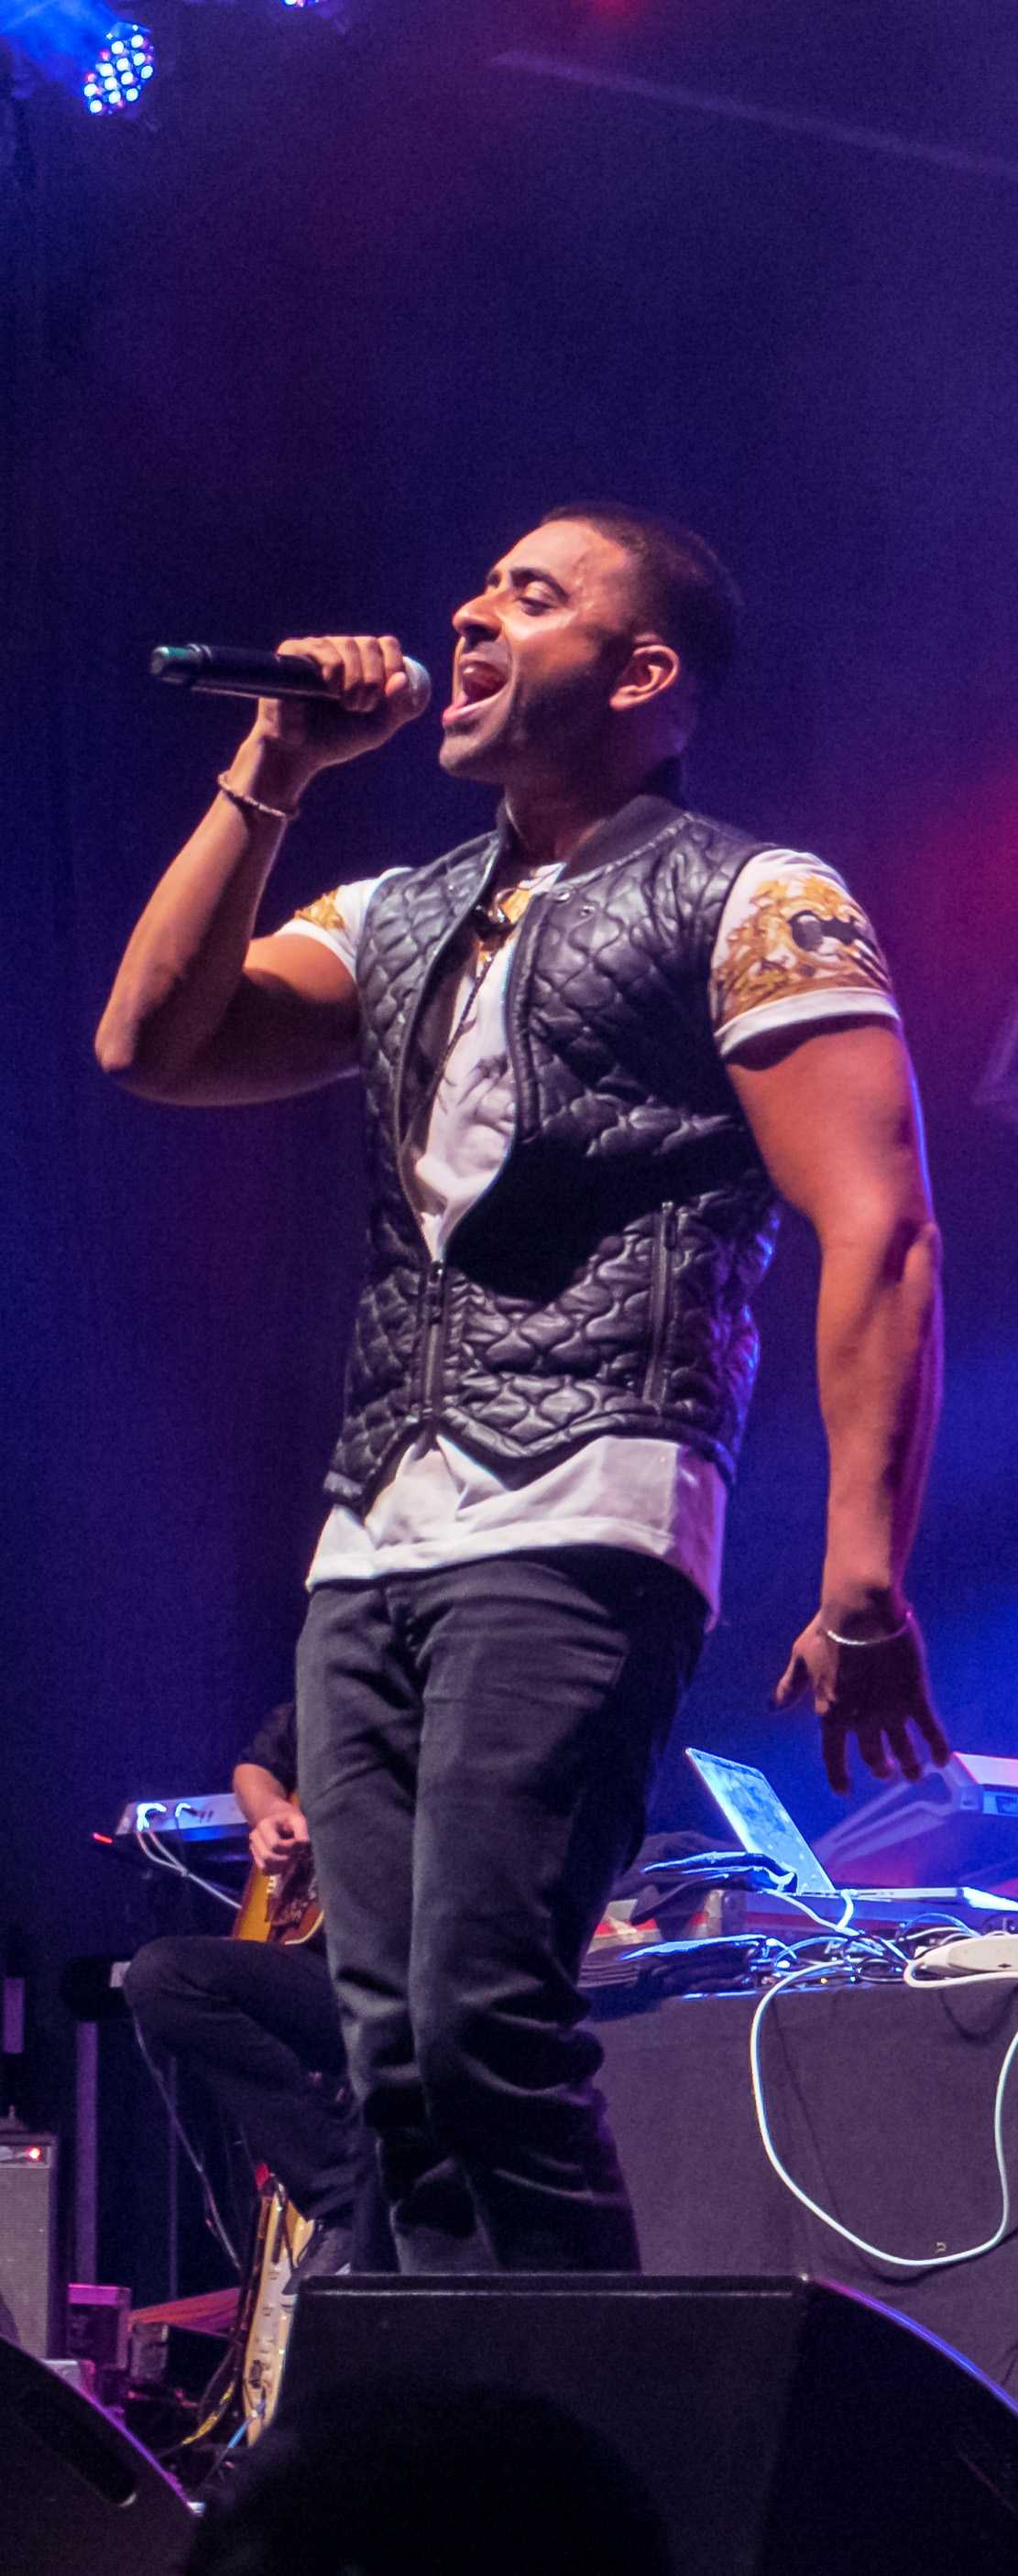 Jay Sean Performs during Owl Prowl in October. Photo by Mohammed F. Emran | Web Editor 